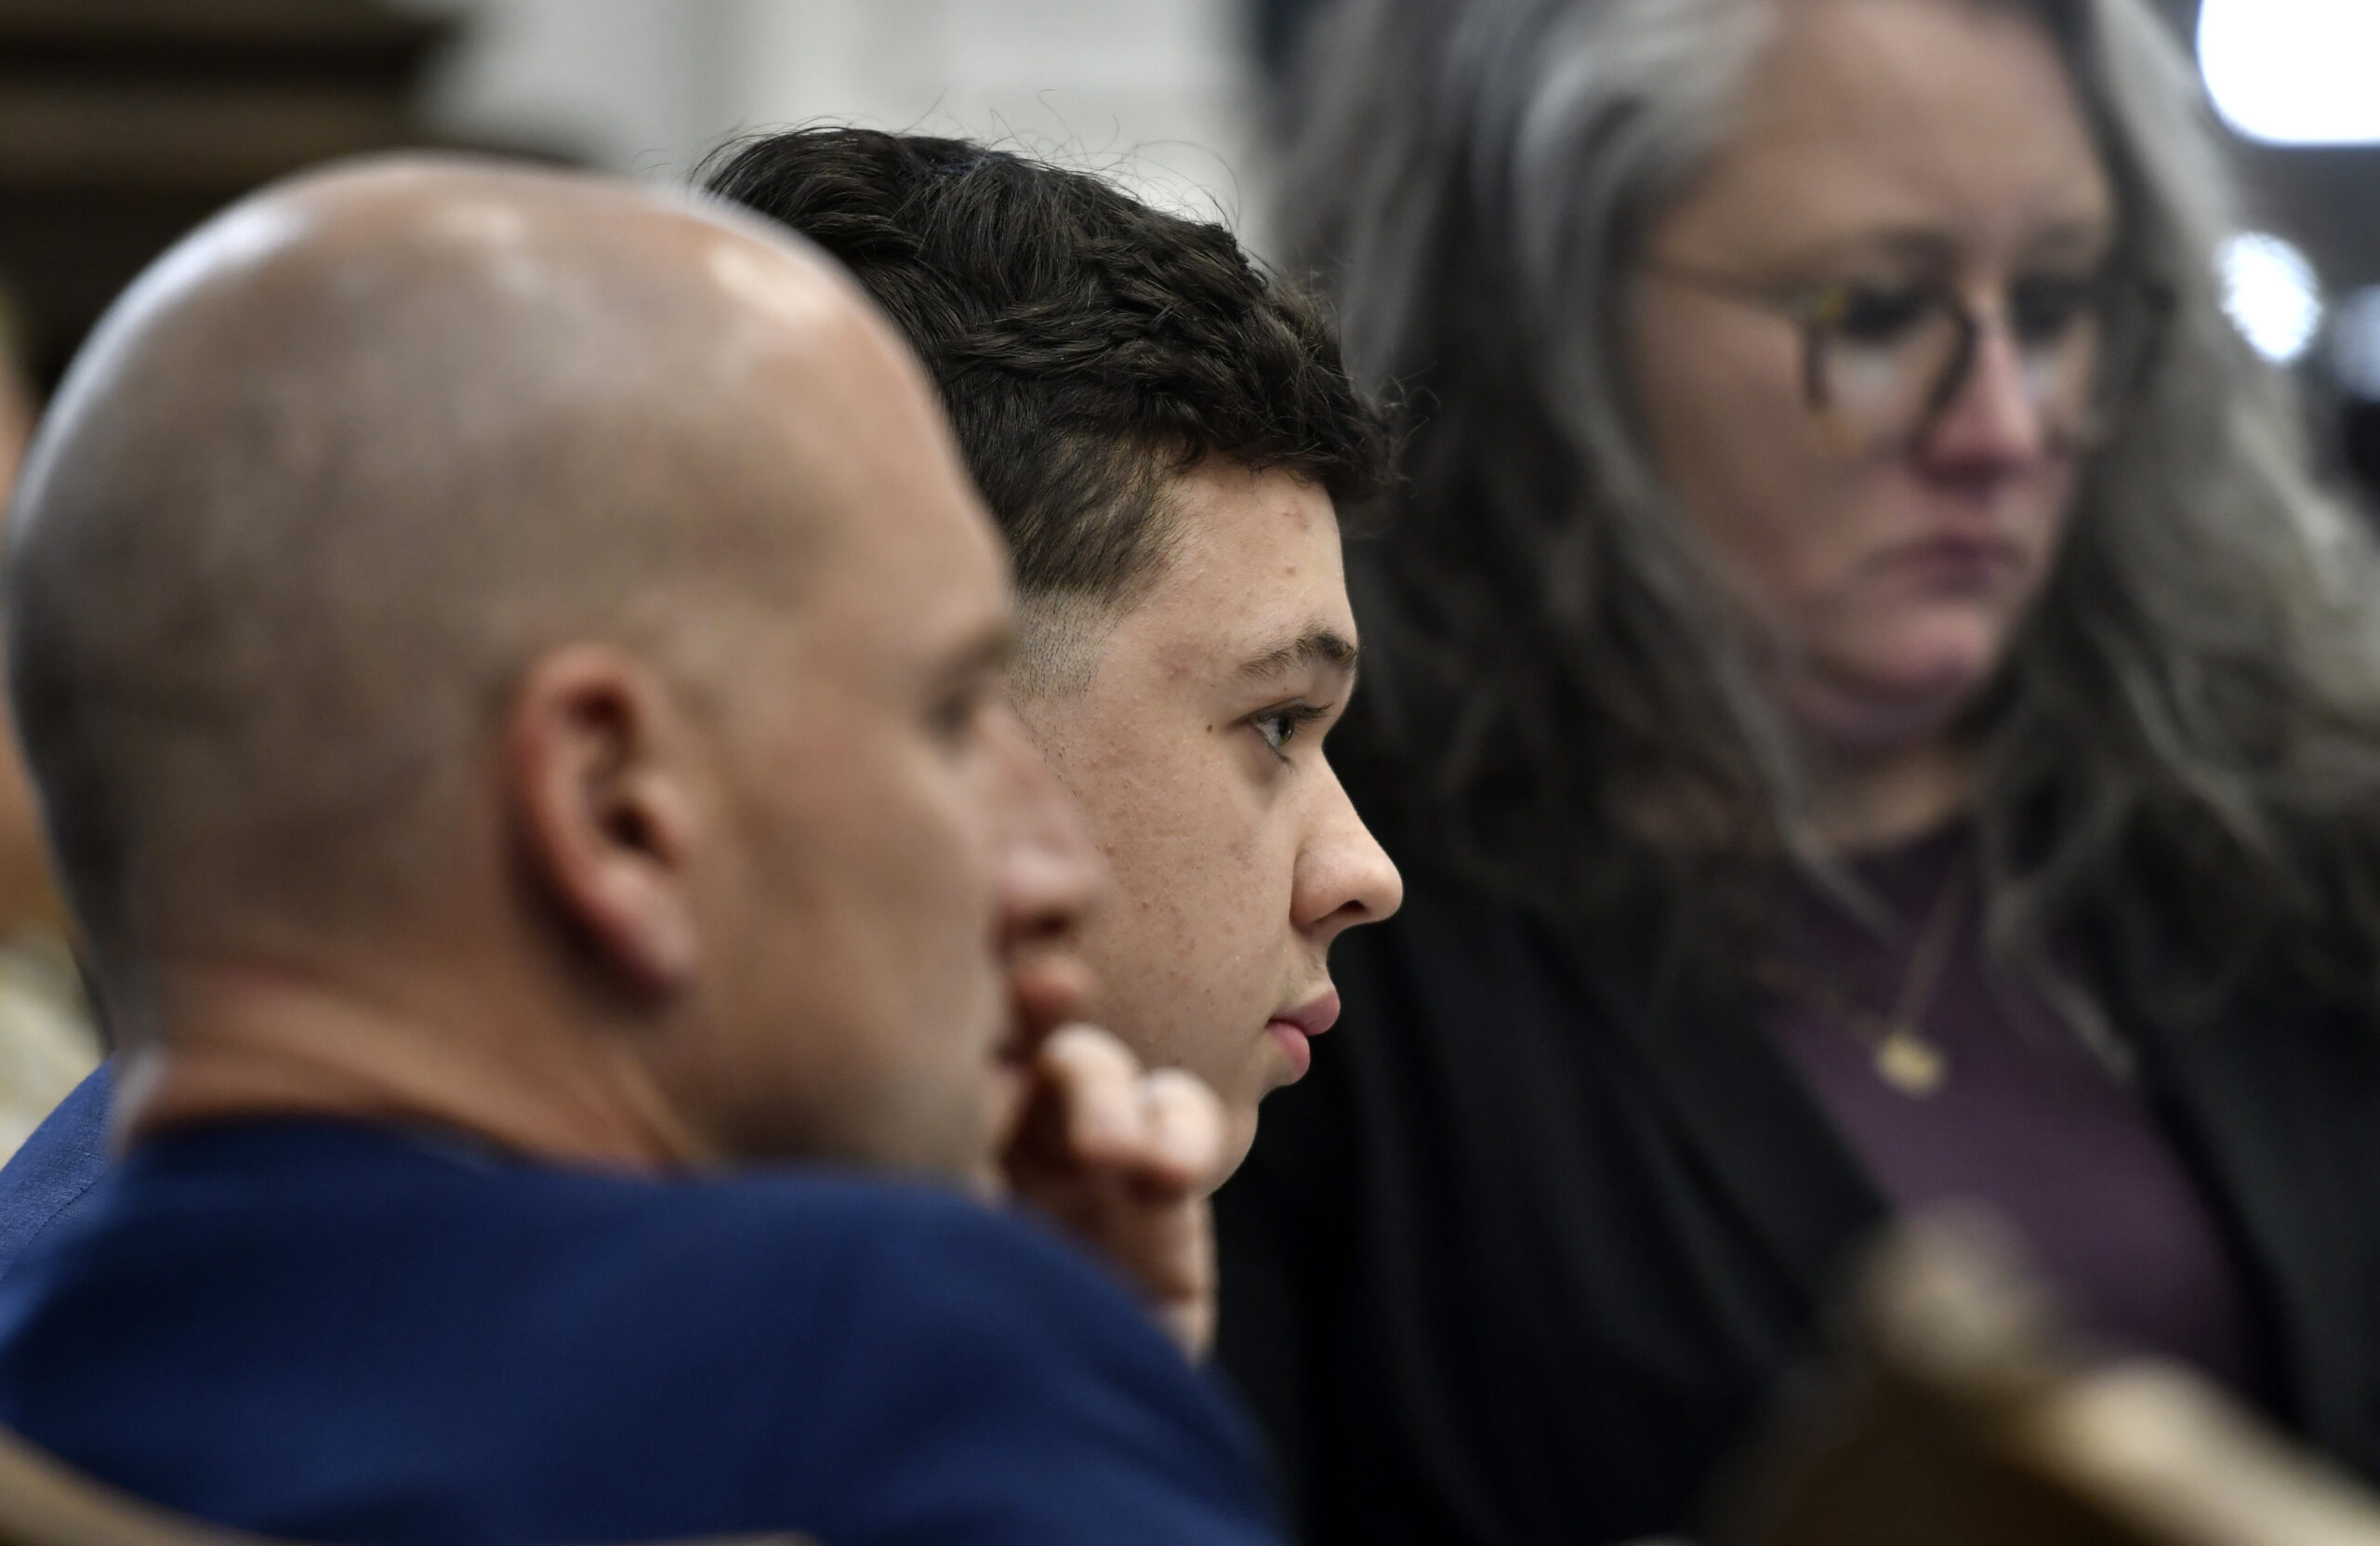 Kyle Rittenhouse, center, watches a video from "The Rundown Live" during his trial